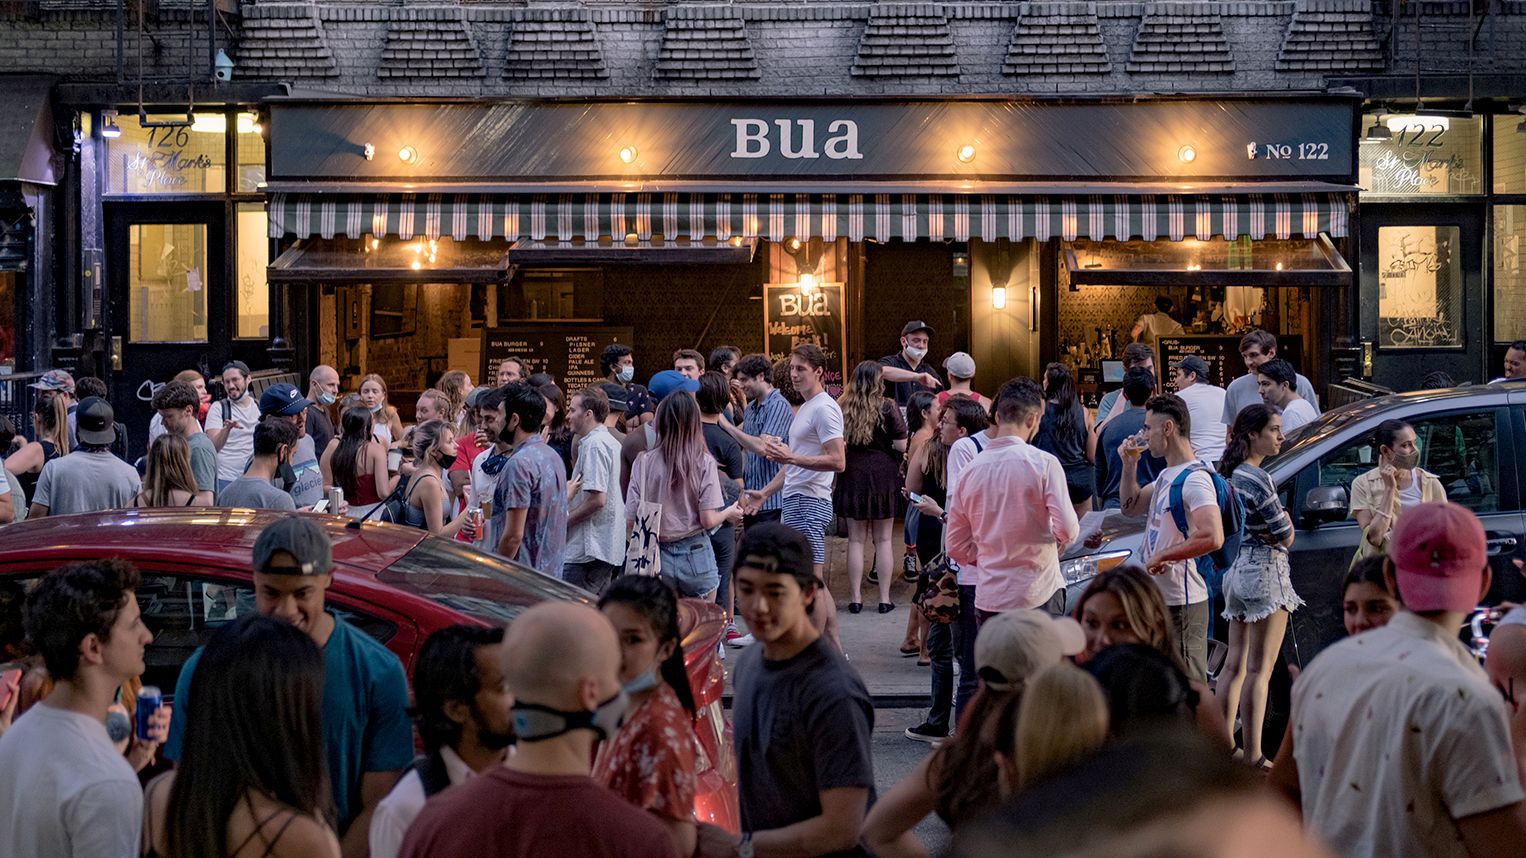 People drink outside a bar in New York City's East Village on June 12. Bars in the city were not allowed to open yet, but many people in New York took to the streets after the city <a href="https://www.cnn.com/interactive/2020/06/us/new-york-coronavirus-reopening-cnnphotos/index.html" target="_blank">entered Phase One of its reopening plan</a> on June 8.